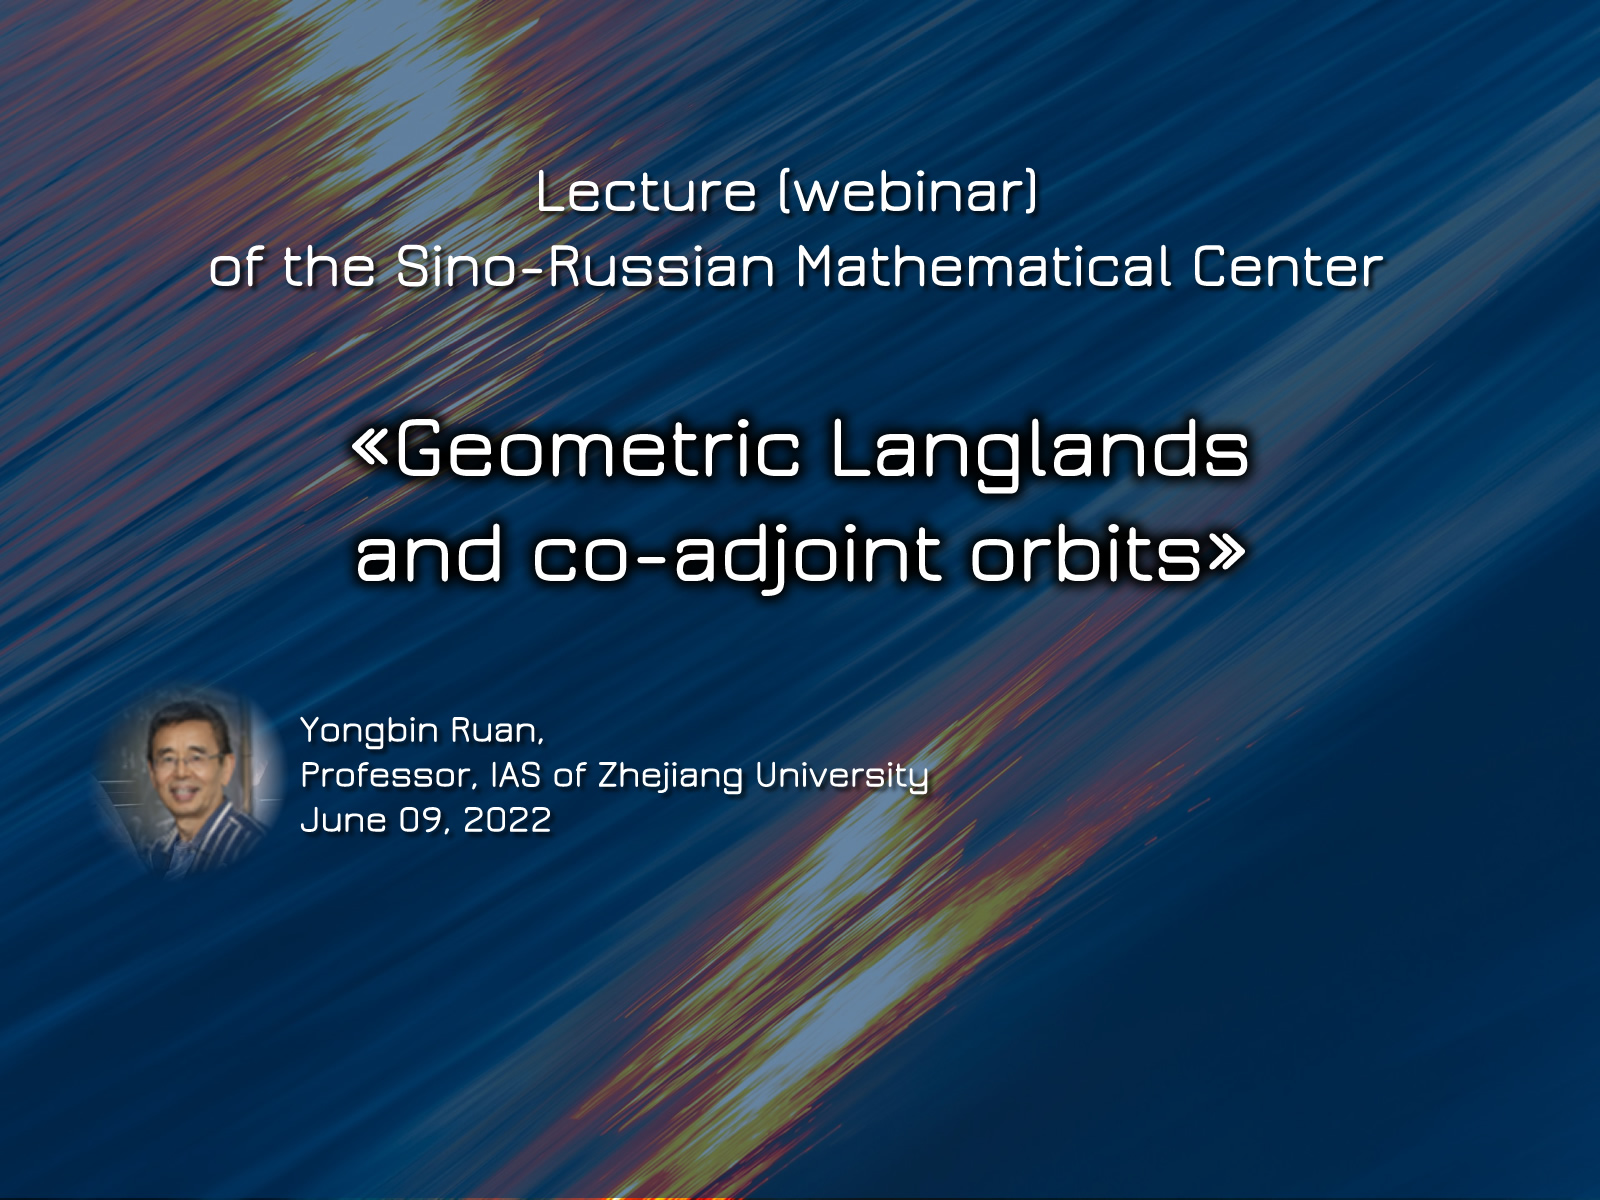 «Geometric Langlands and co-adjoint orbits» 09.06.2022